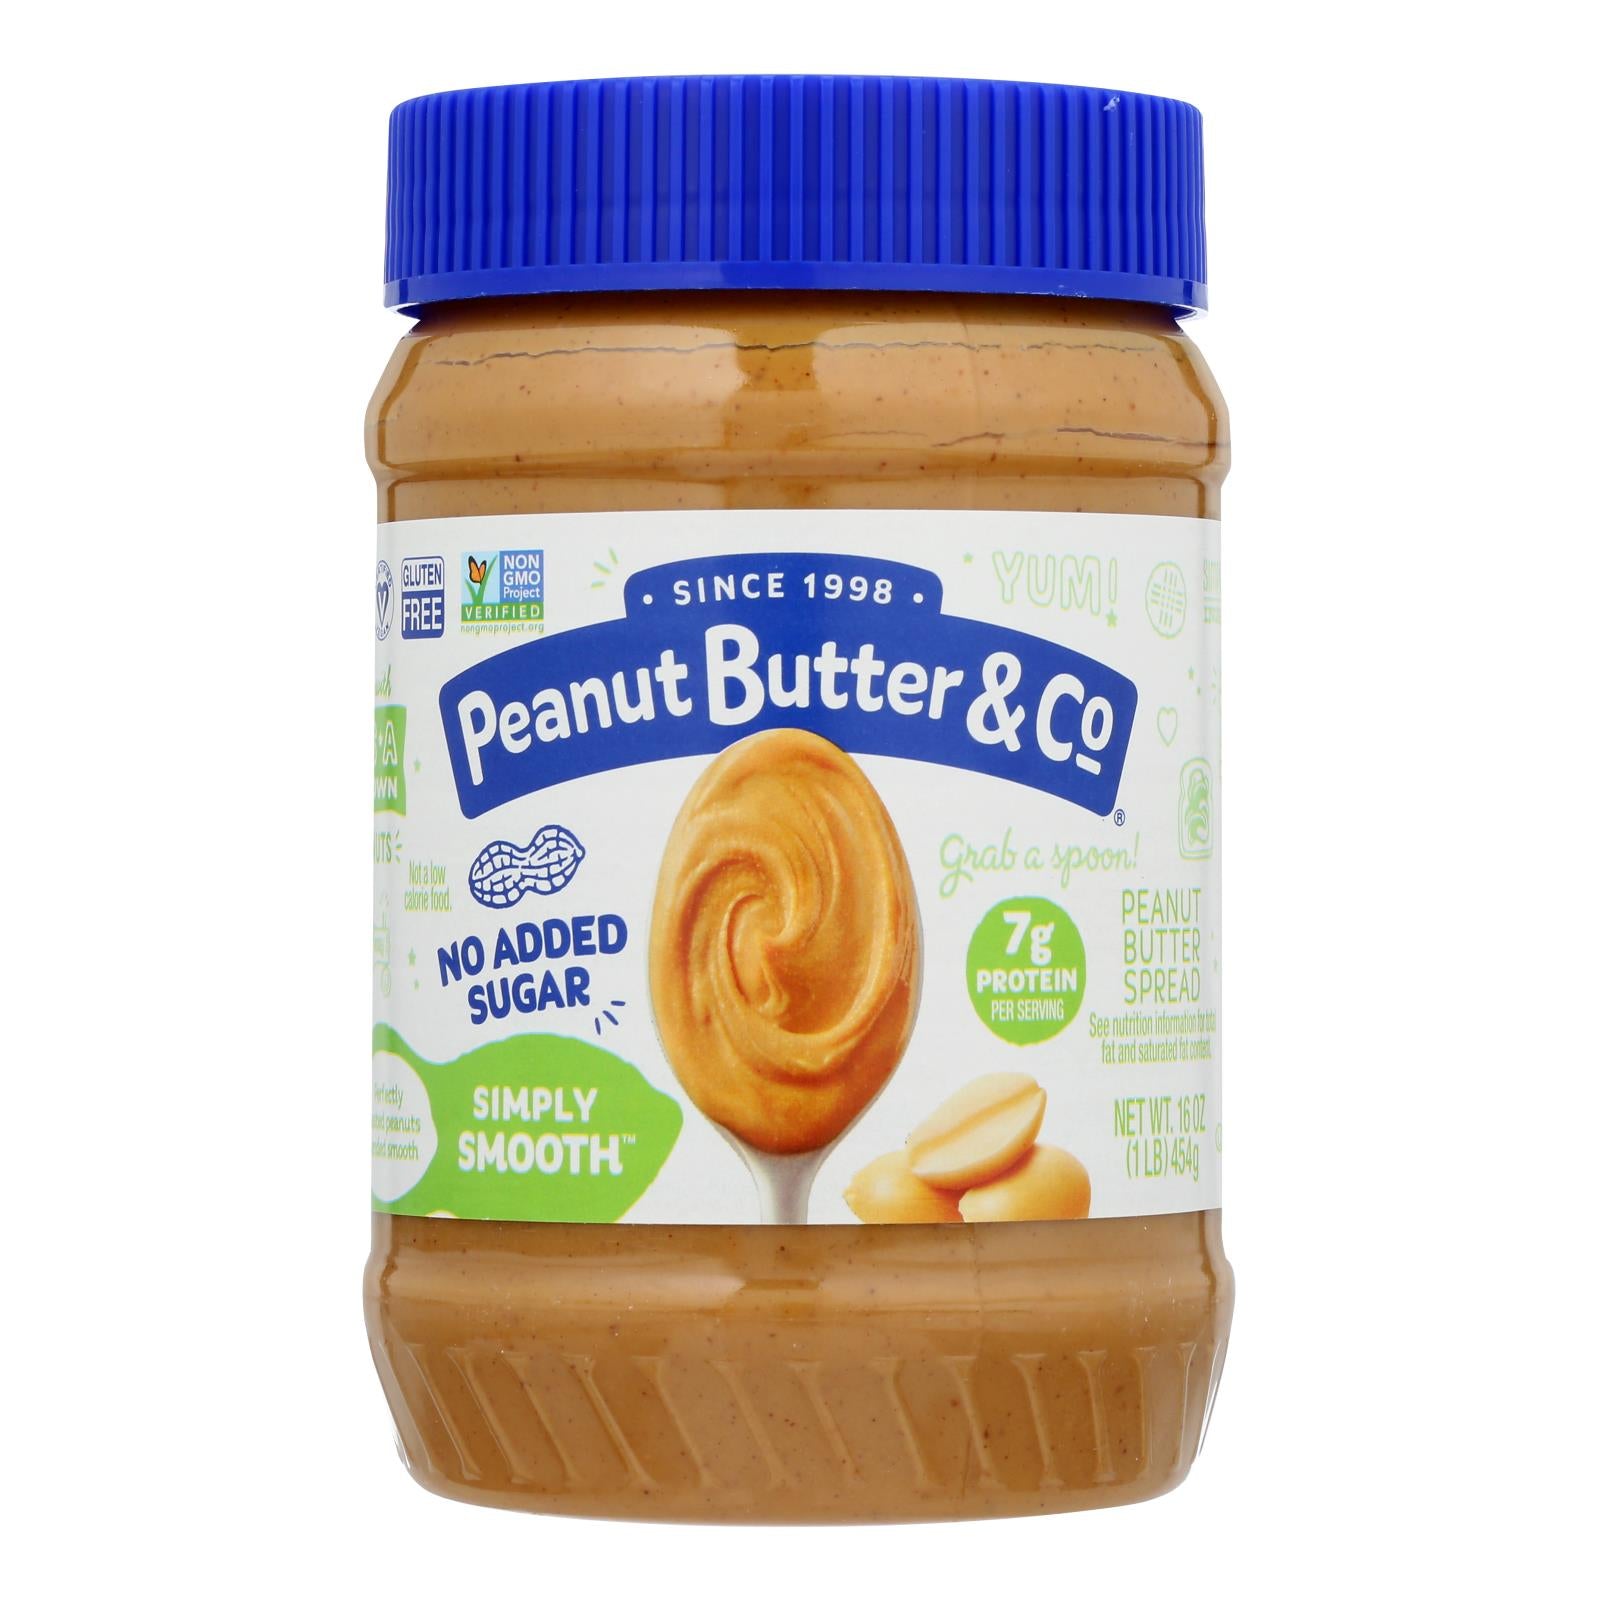 Peanut Butter & Co - Peanut Butter No Sugar Smooth - Case Of 6 - 16 Oz - Whole Green Foods